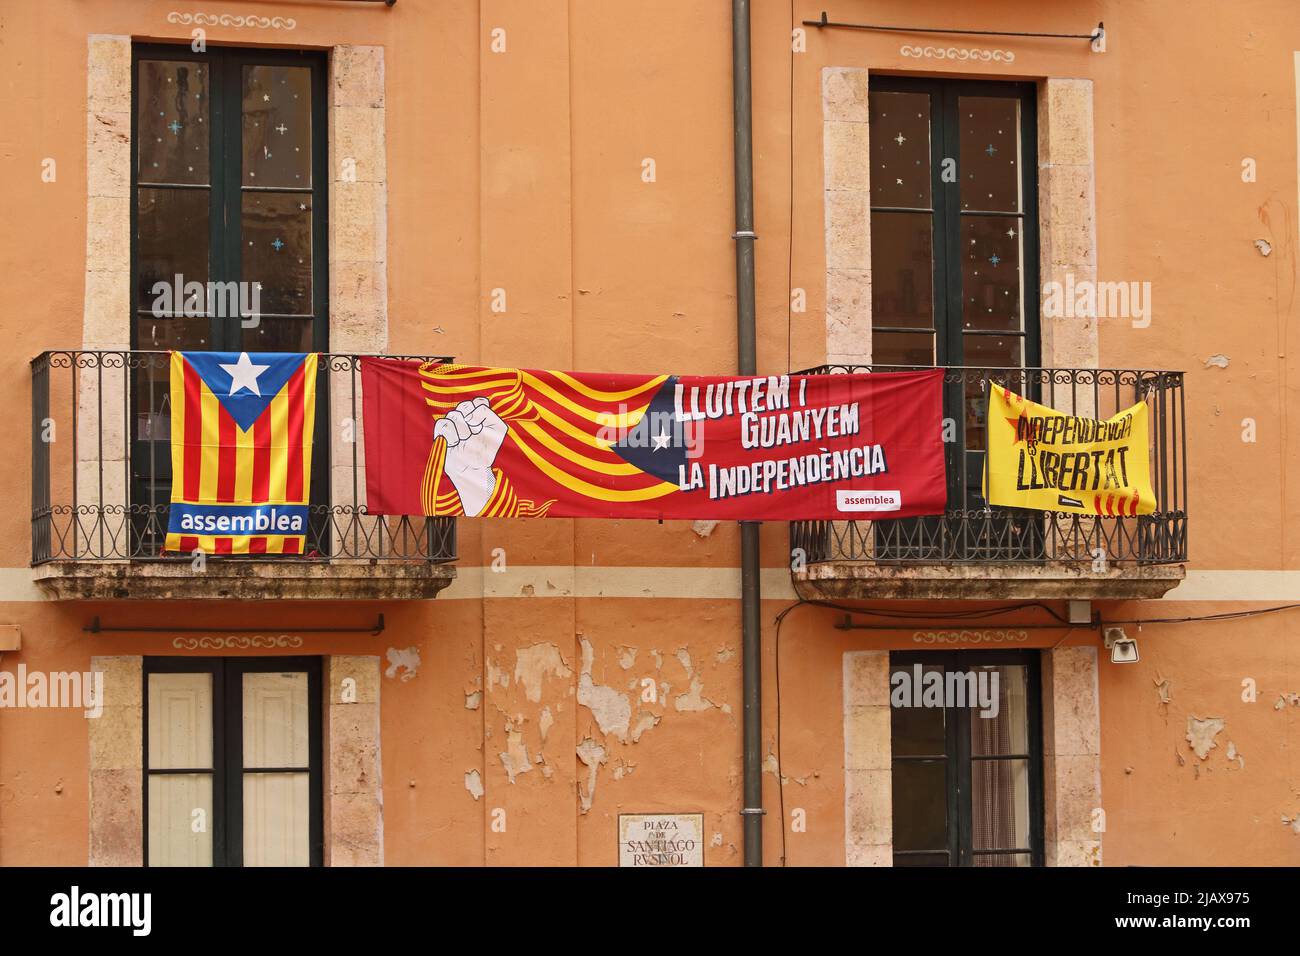 Banners on balconies promoting Catalan independence, Tarragona Stock Photo